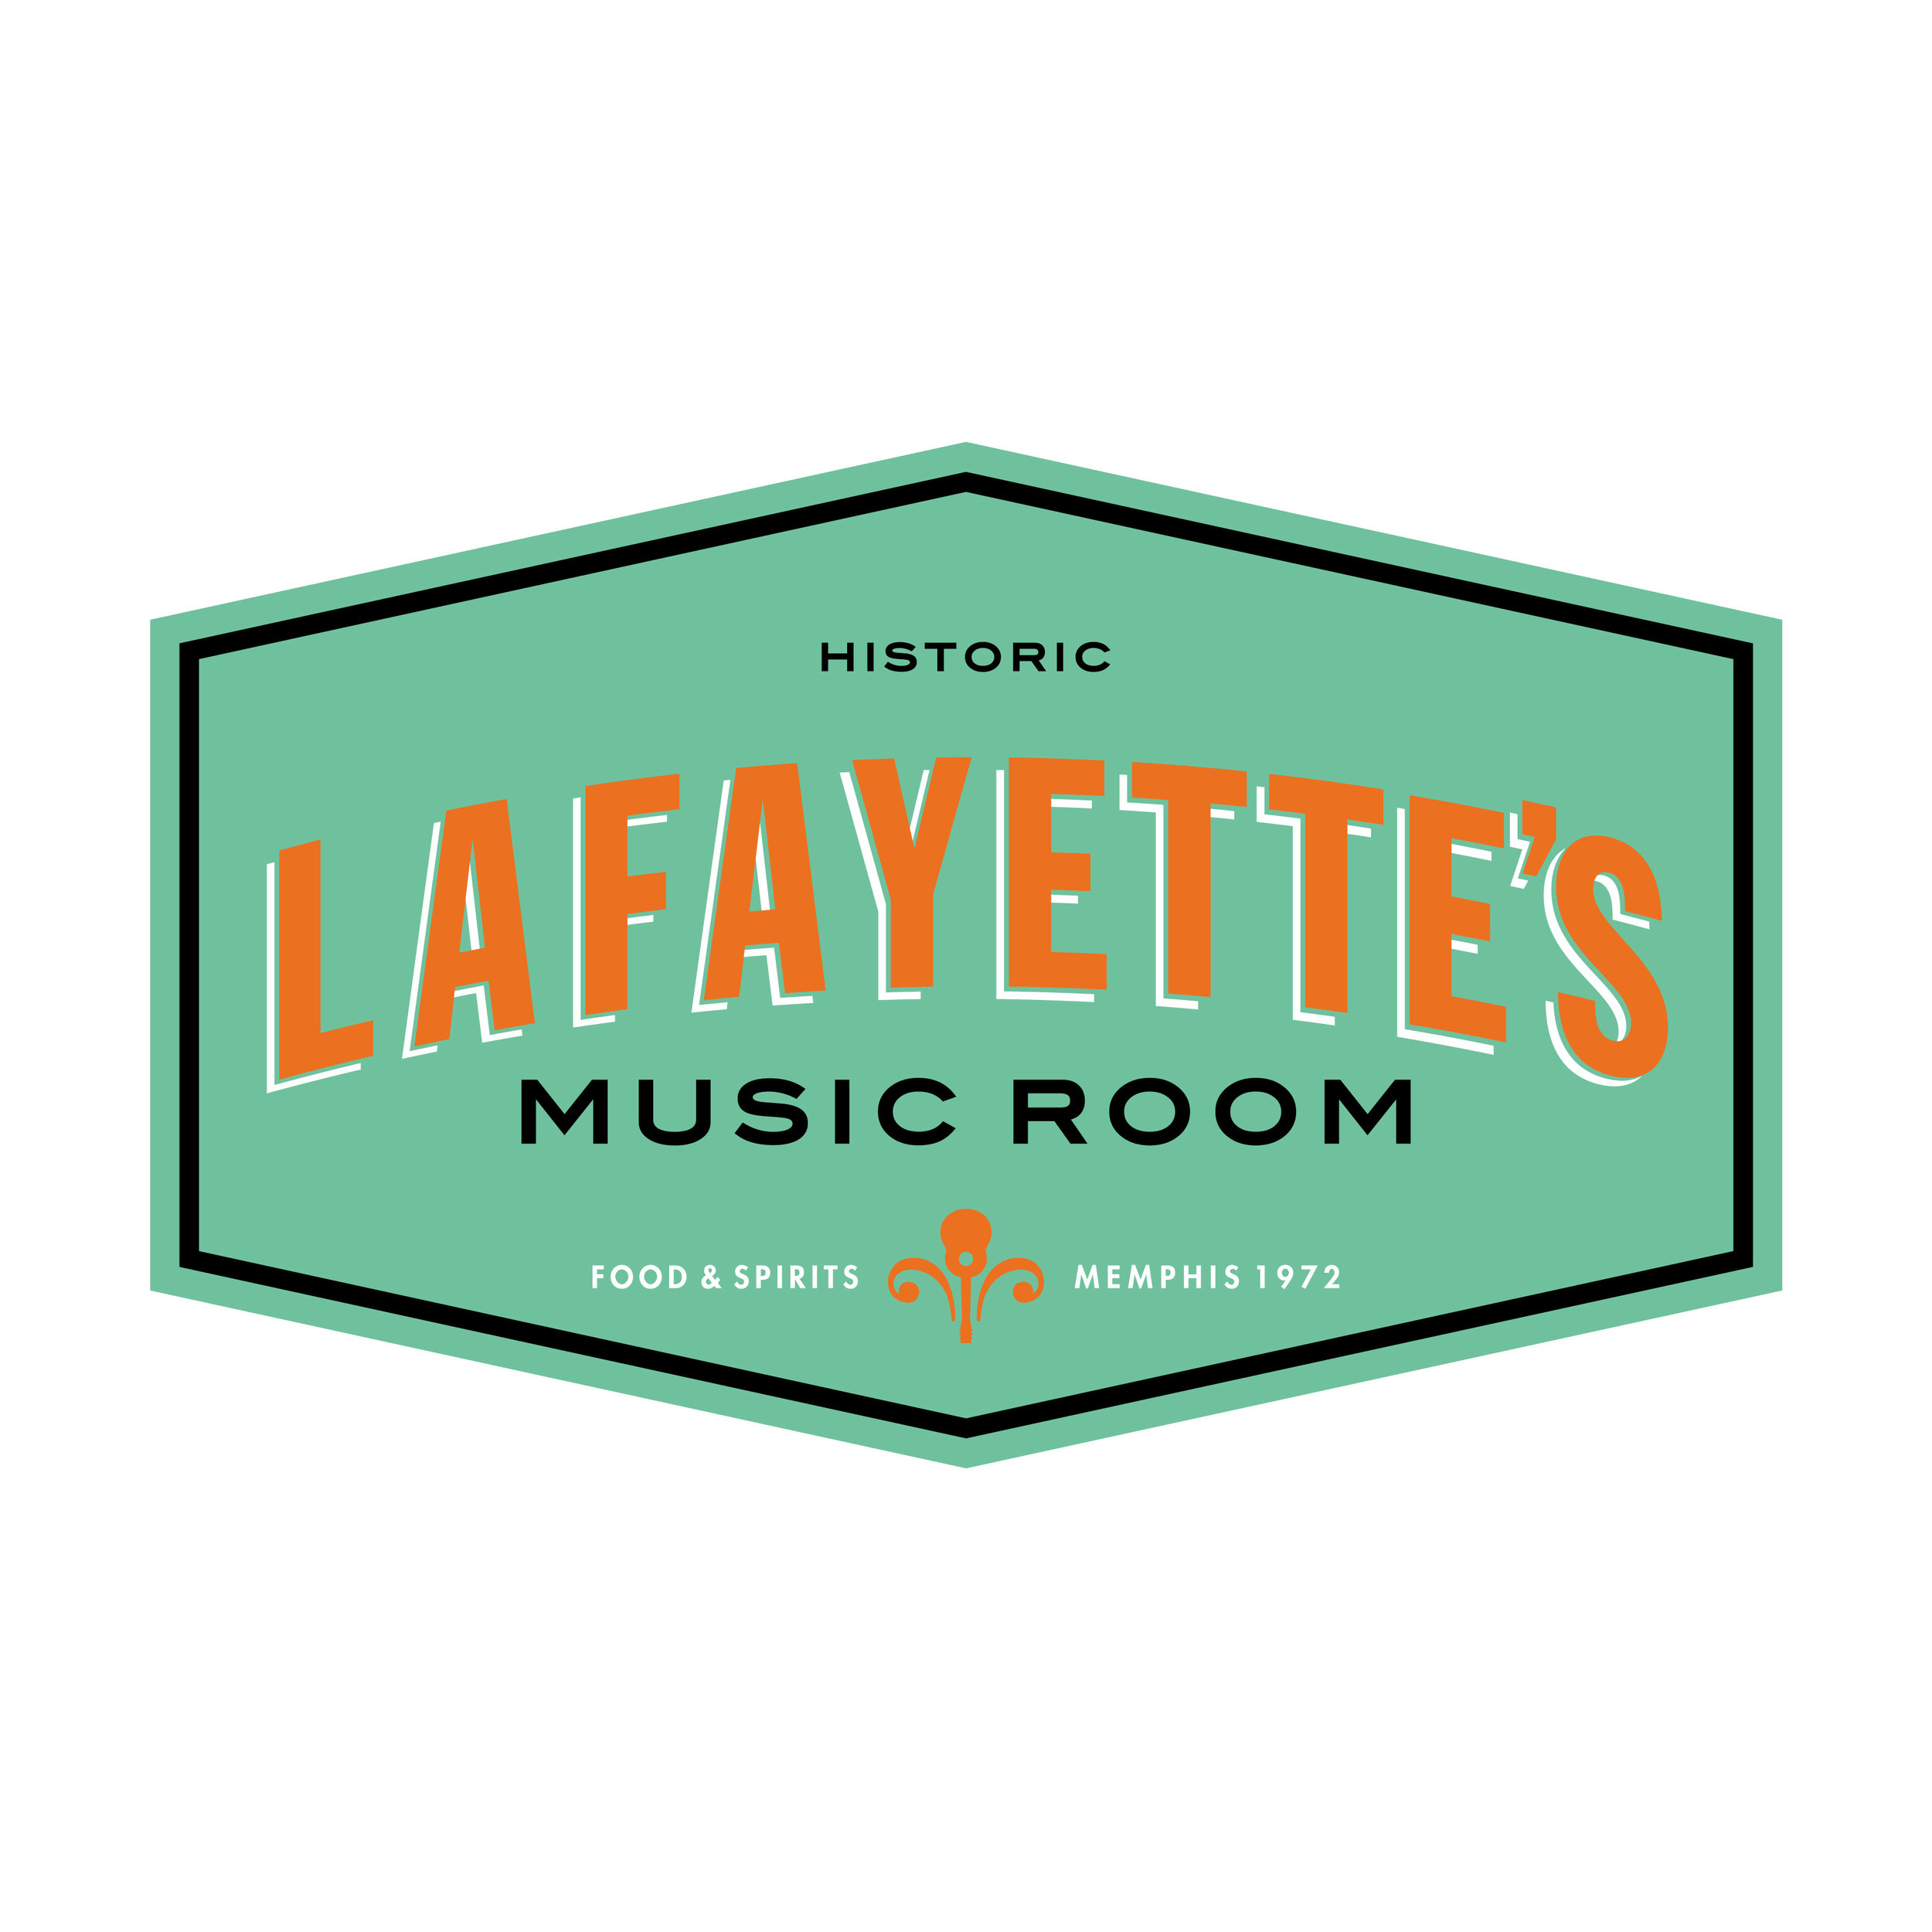  Lafayette’s Music Room logo  Creative and design by Chuck Mitchell  Overton Square Memphis, Tennessee 